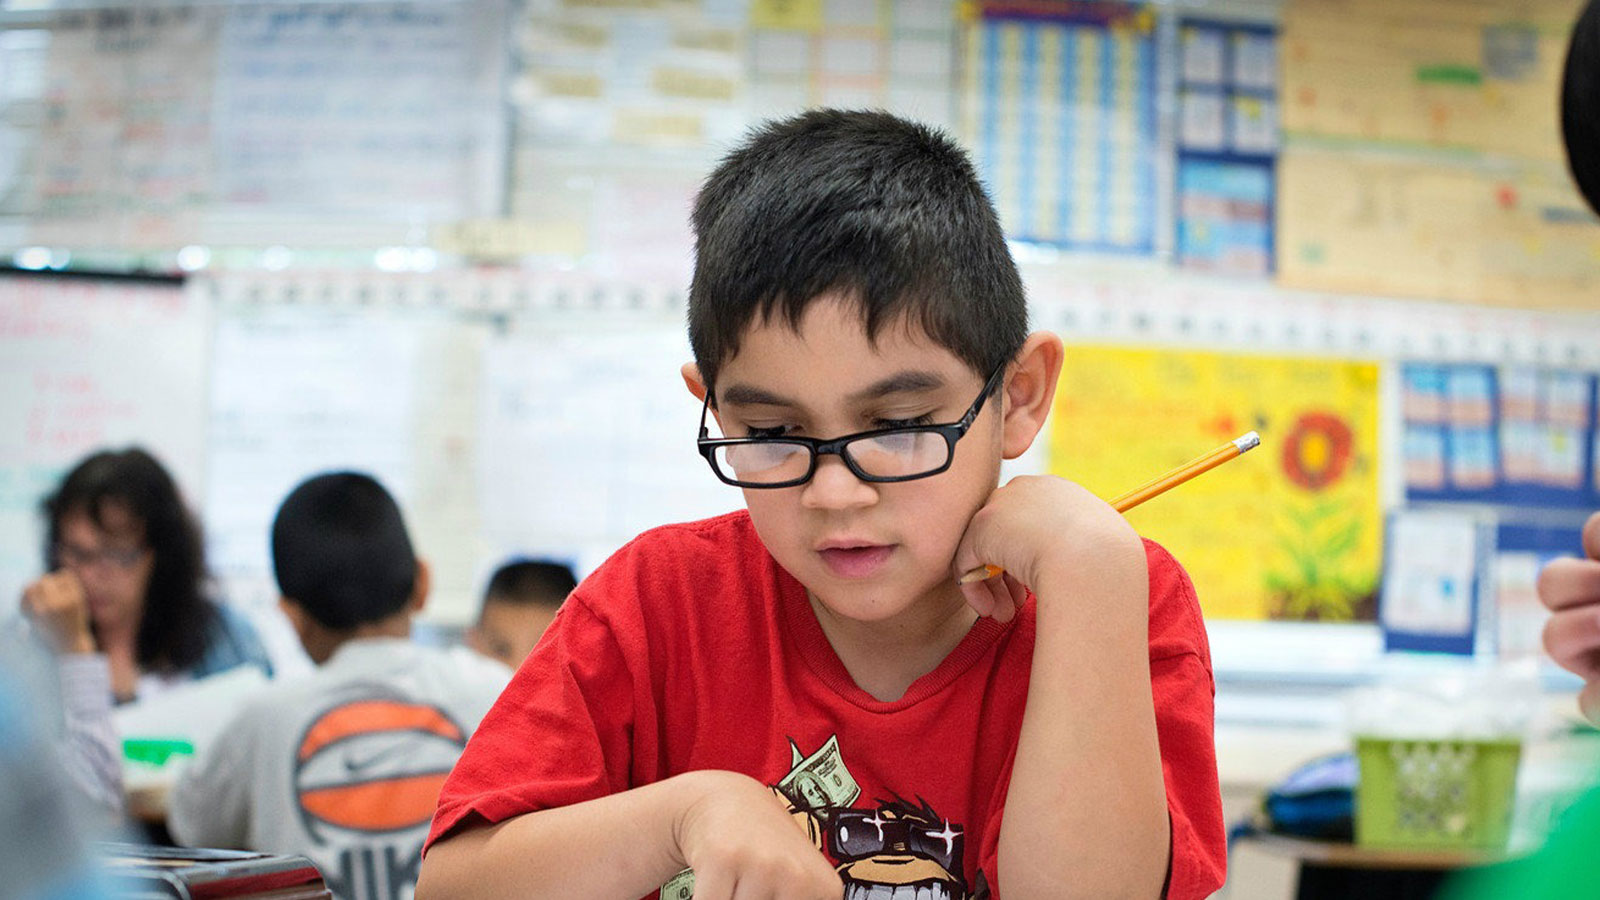 A young student in a red shirt works on an assessment that will give his teacher important data